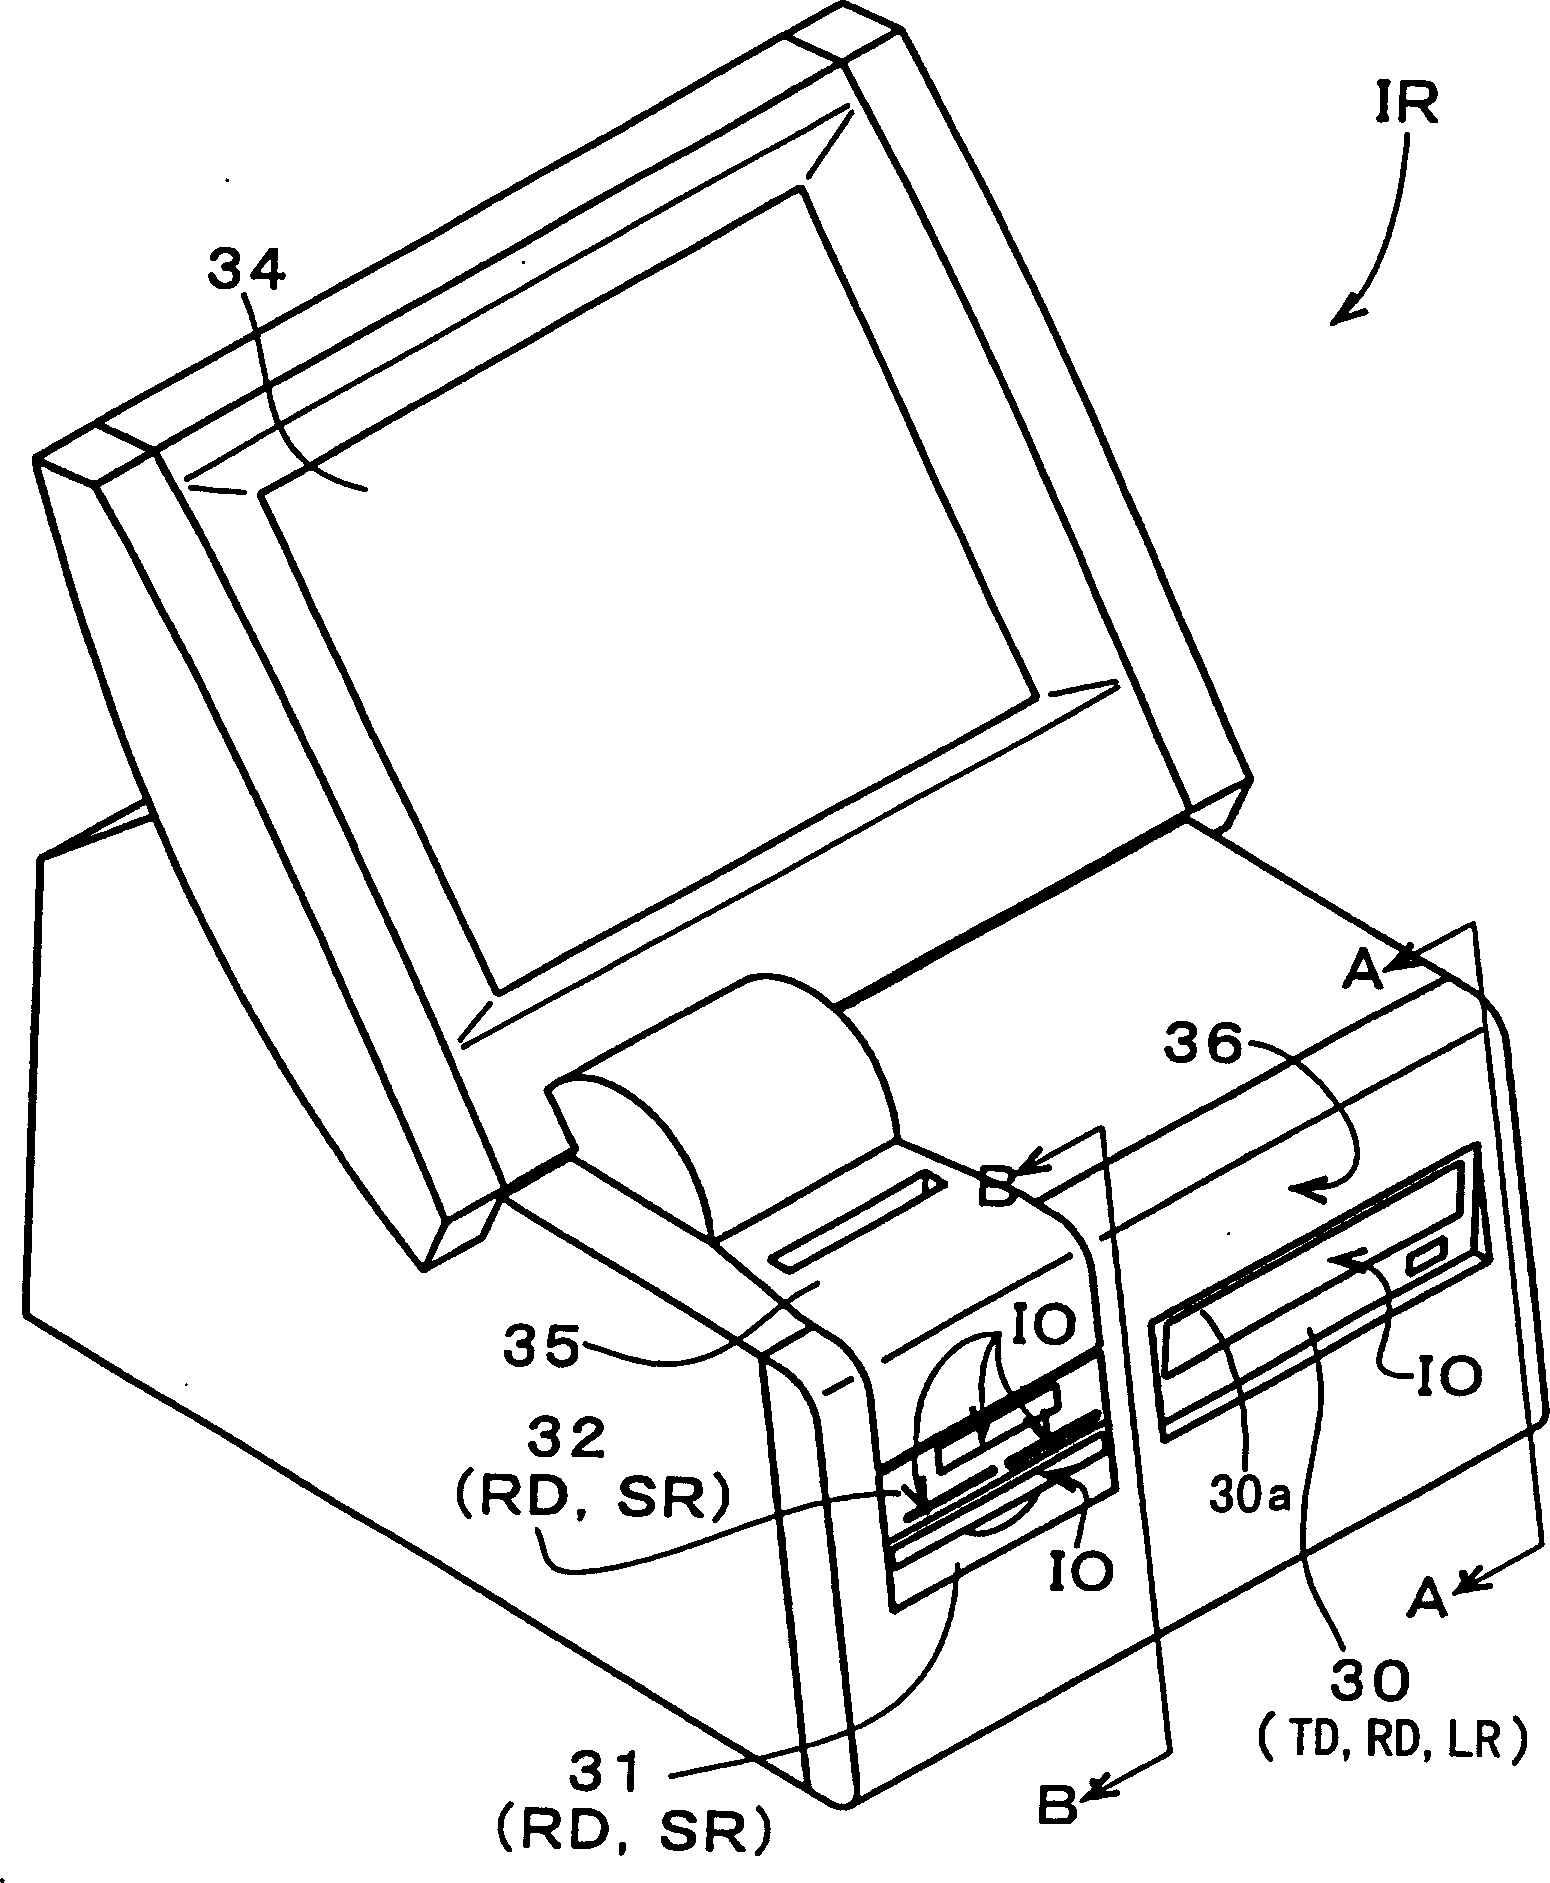 Print acceptance by agreement arrangement for image data